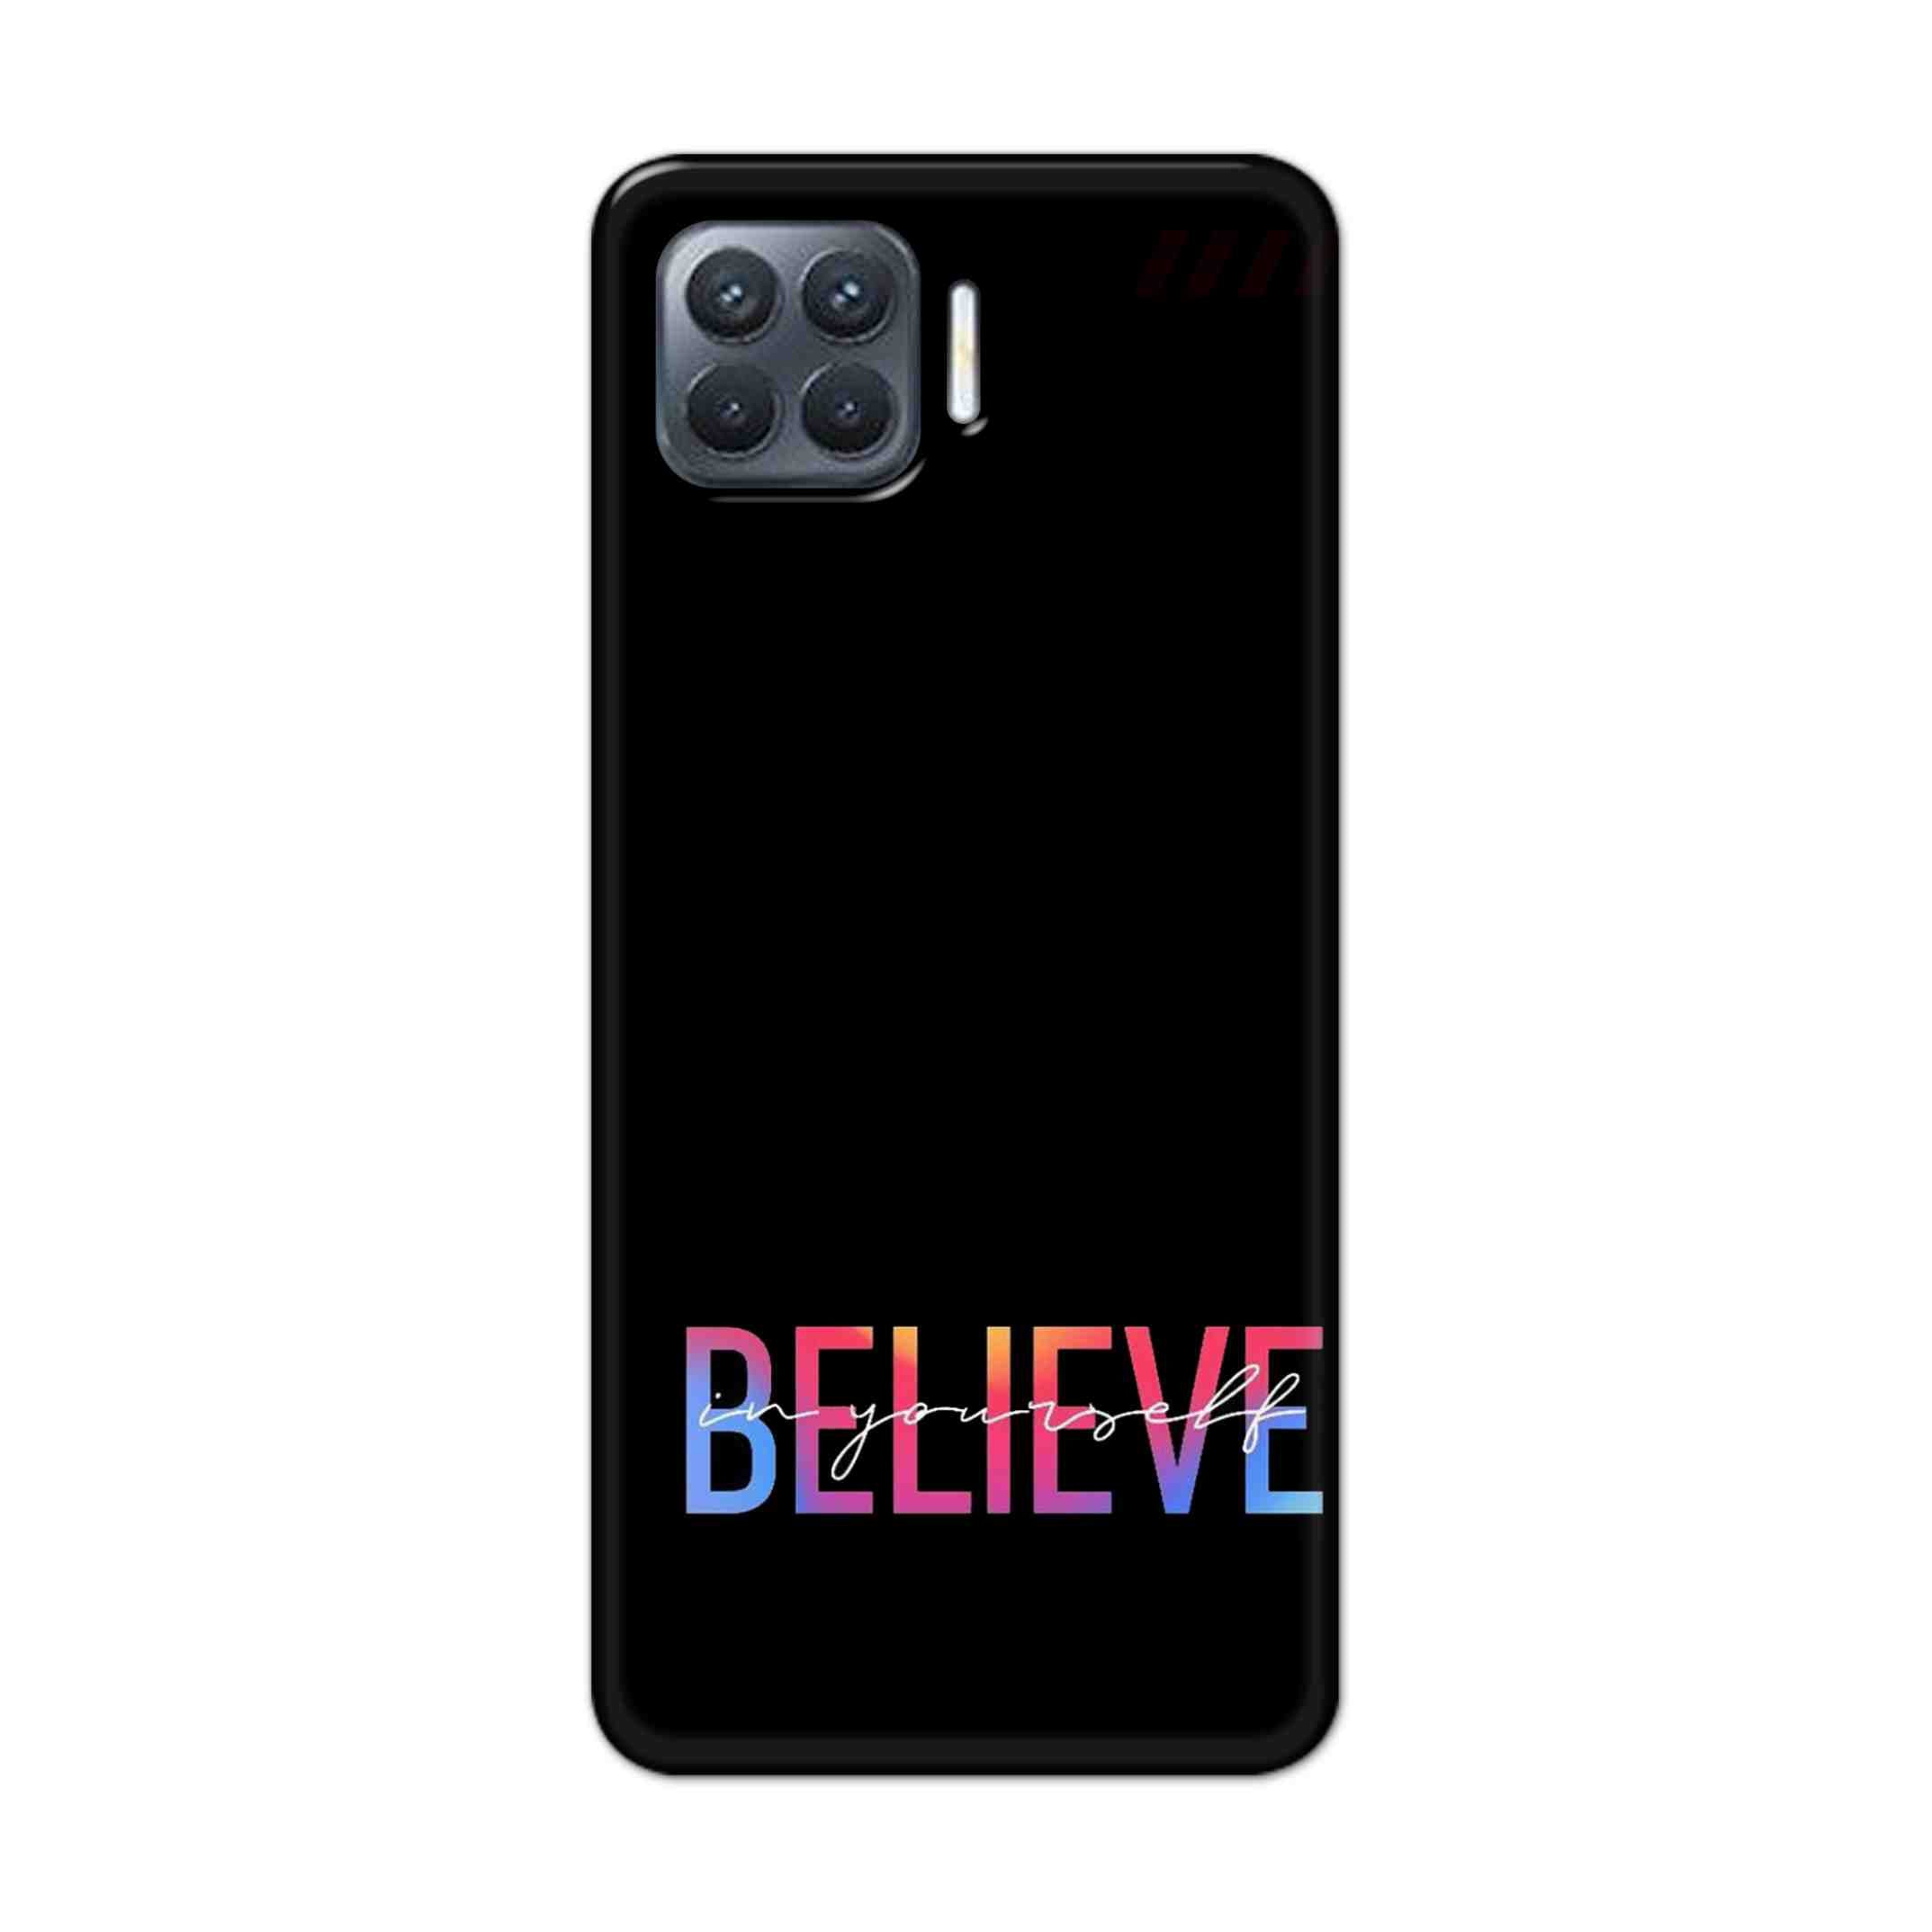 Buy Believe Hard Back Mobile Phone Case Cover For Oppo F17 Pro Online